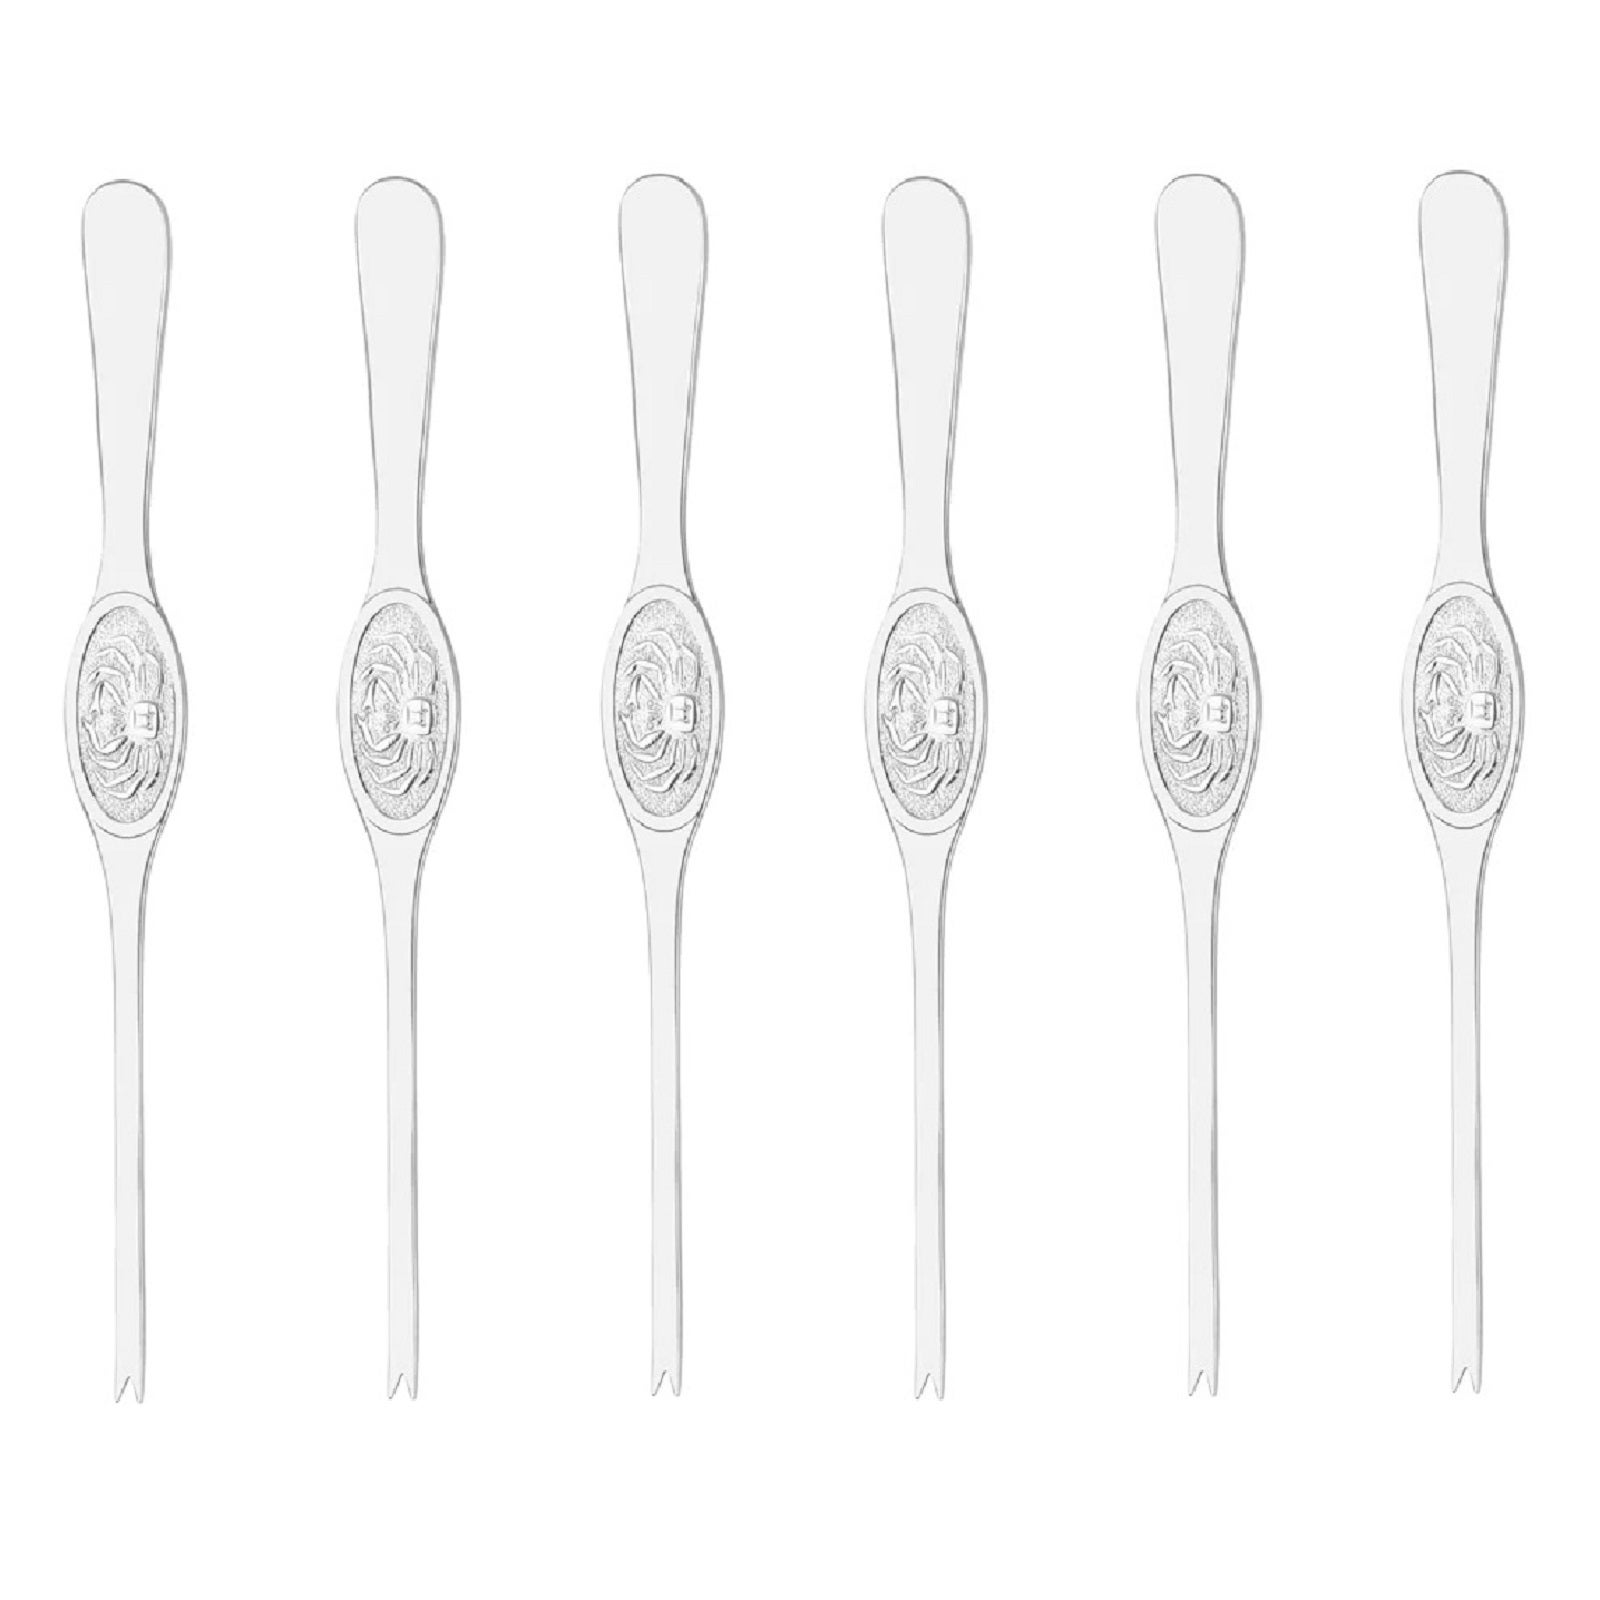 Chef Inox Lobster Crab Forks Set of 6